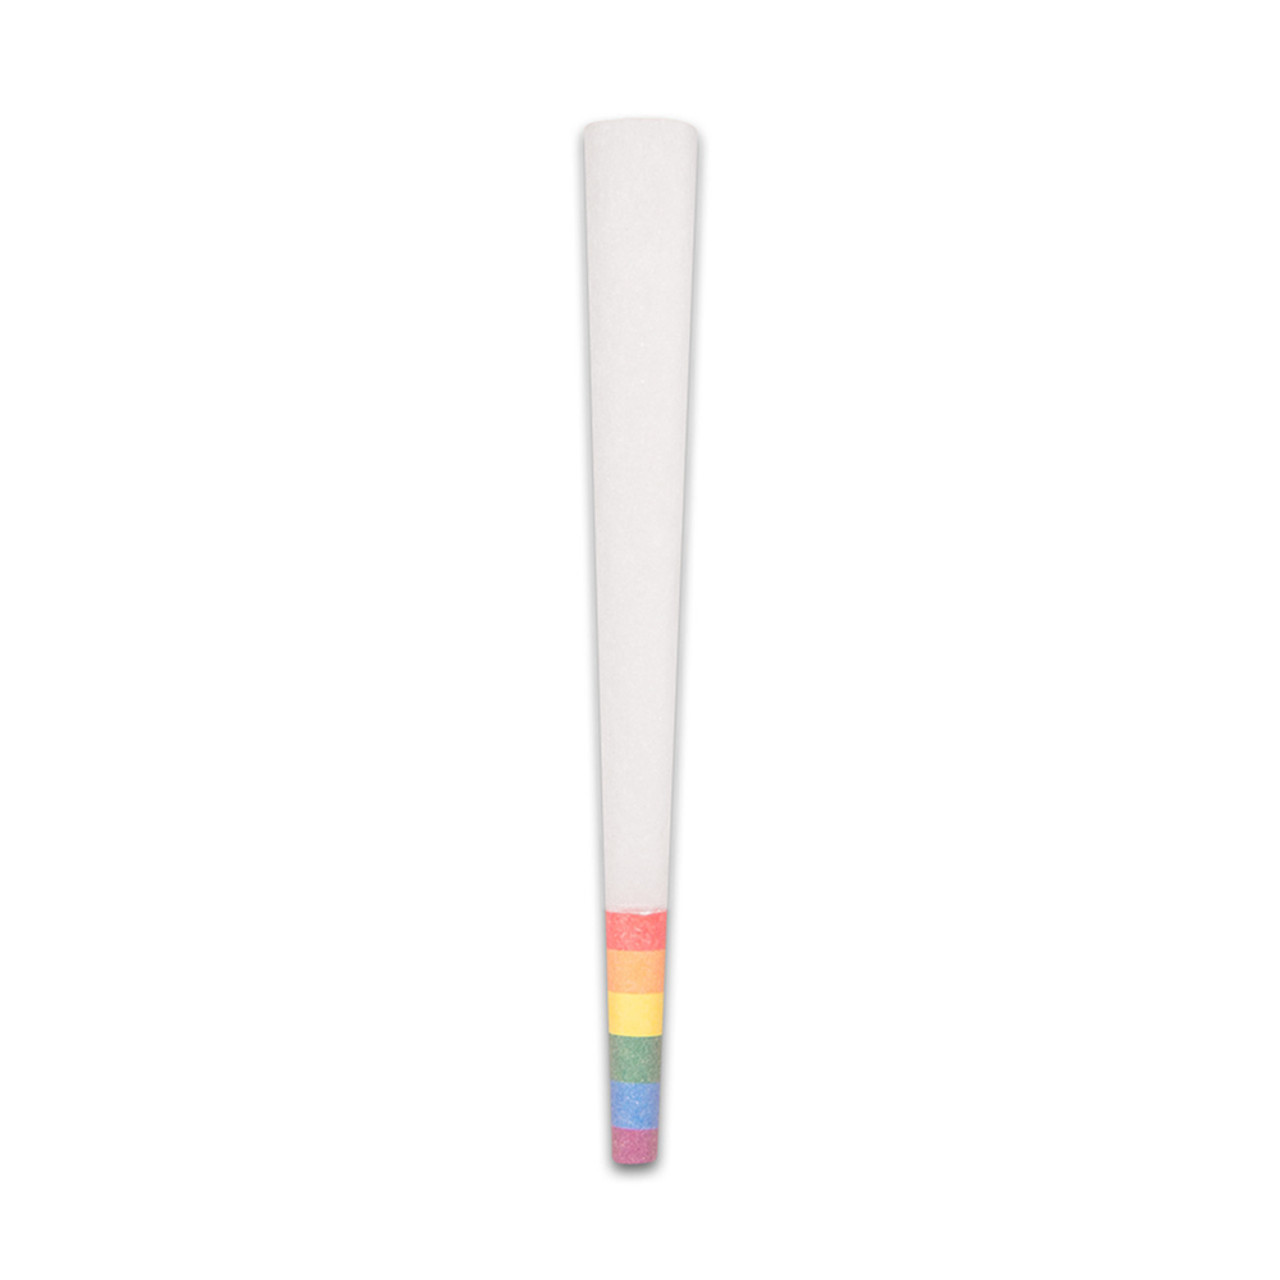 A pre-rolled cone with a rainbow flag filter tip for LGBTQ+ pride month